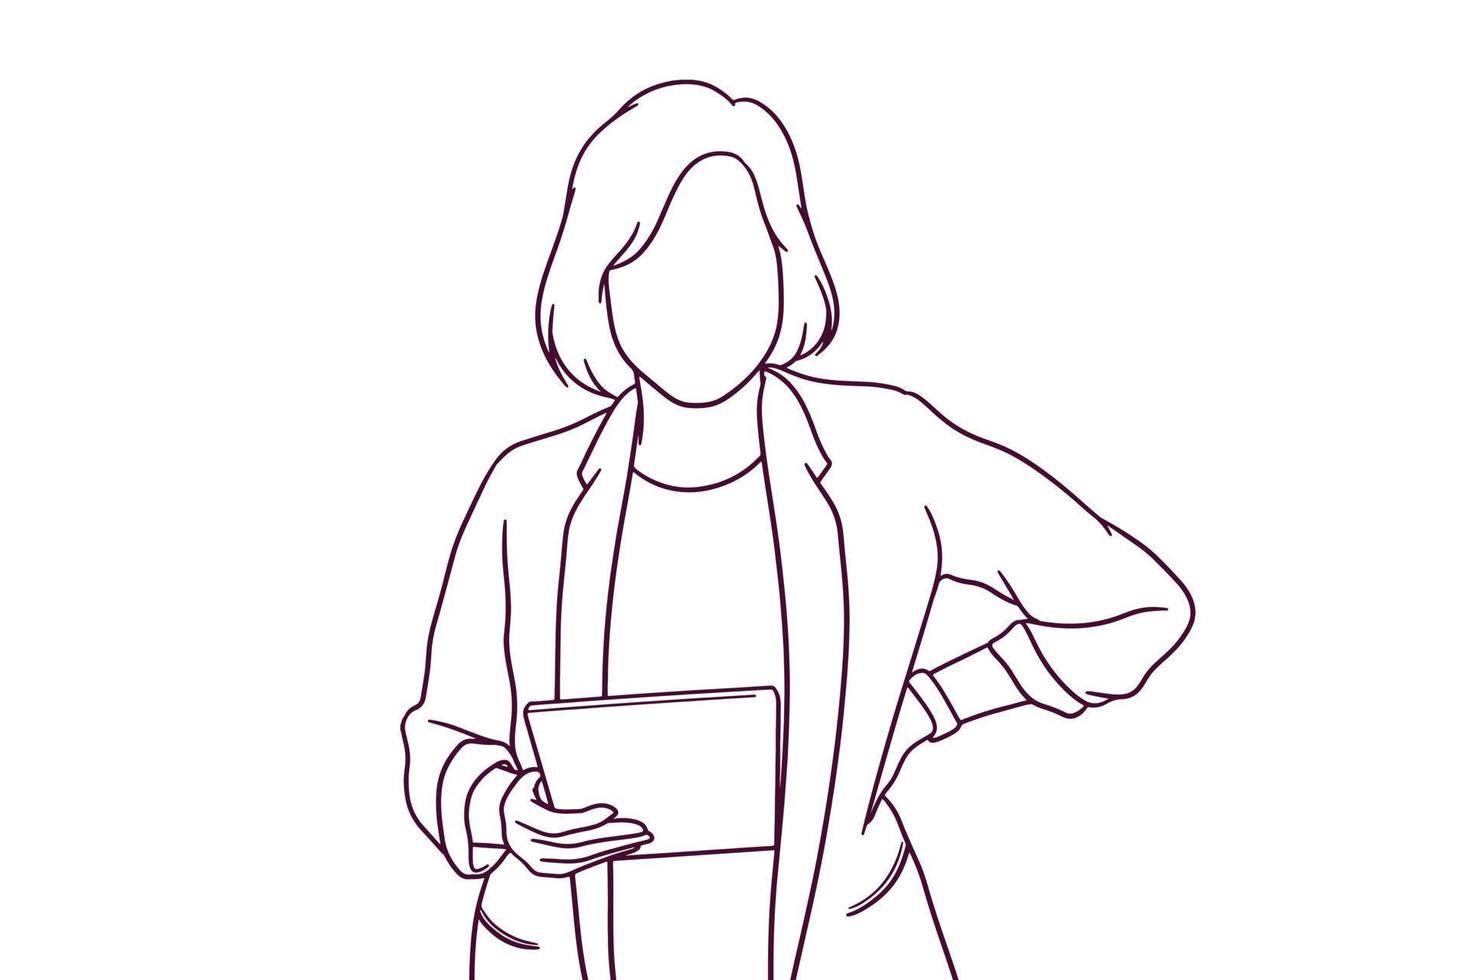 hand drawn business woman using tablet illustraton vector